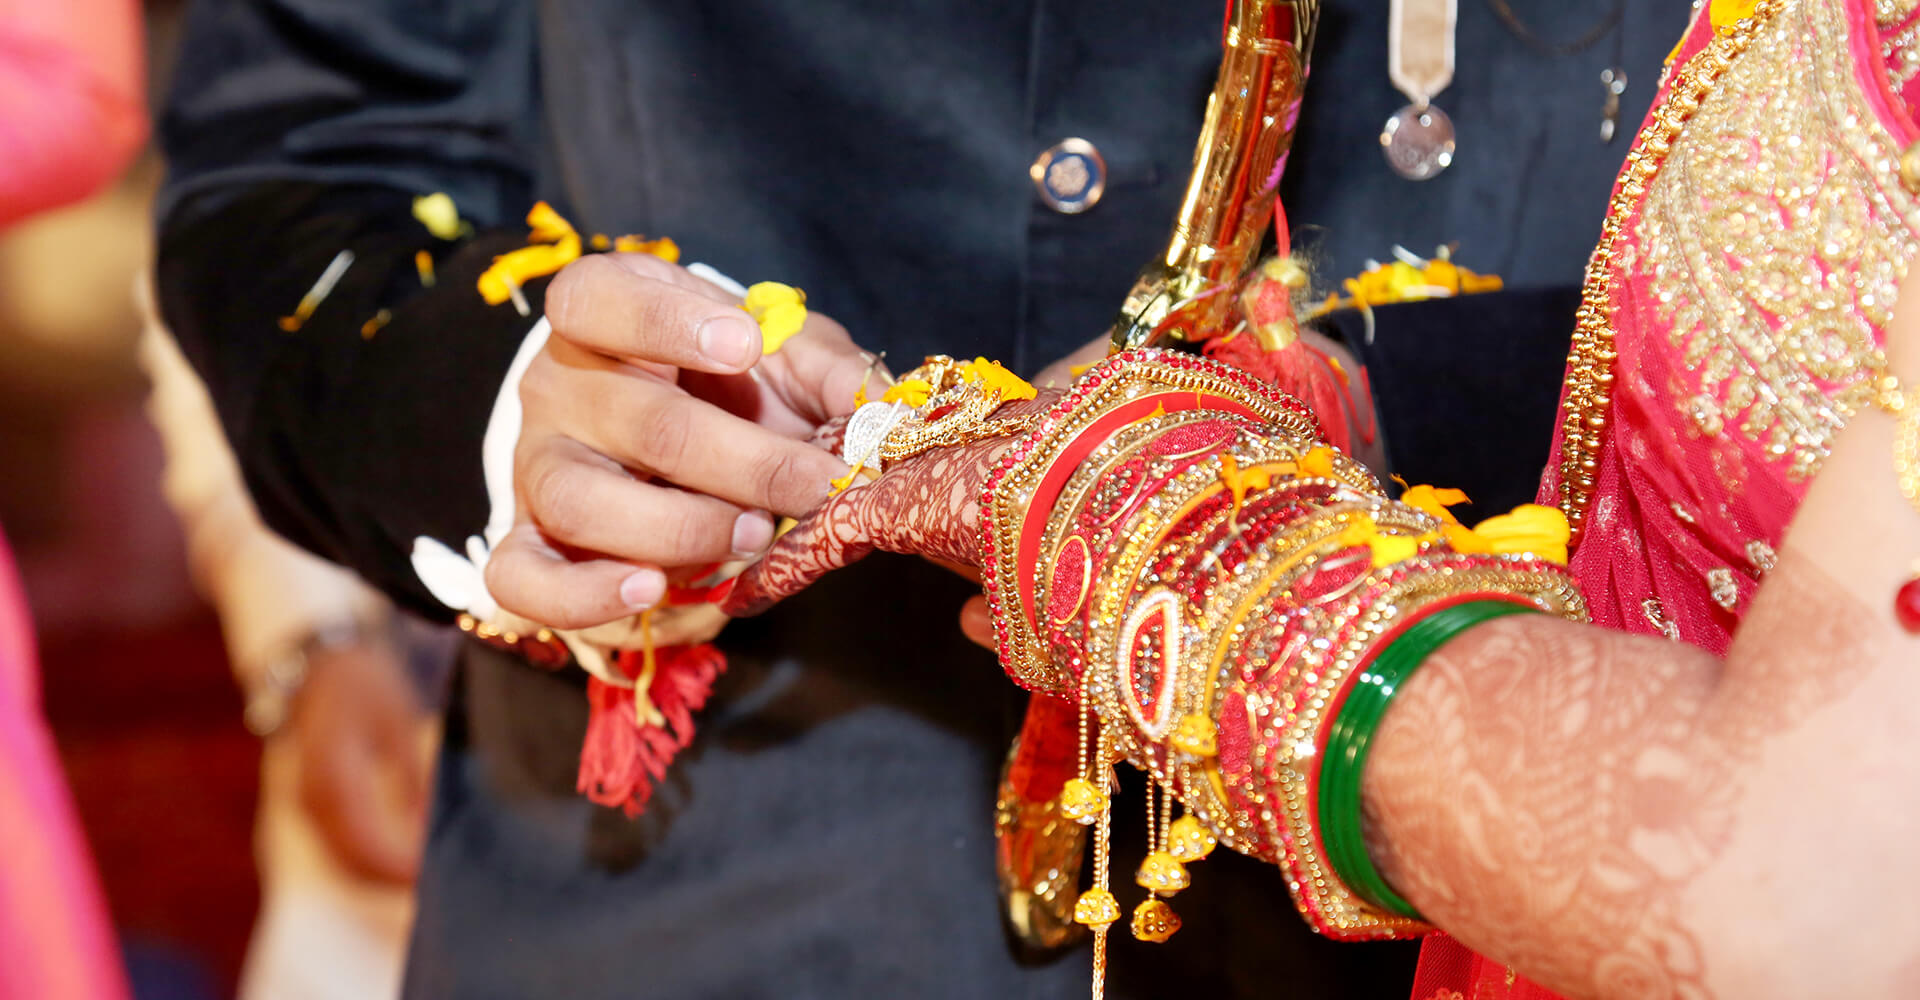 close-up of hands of indian groom placing wedding ring on his bride at an indian wedding